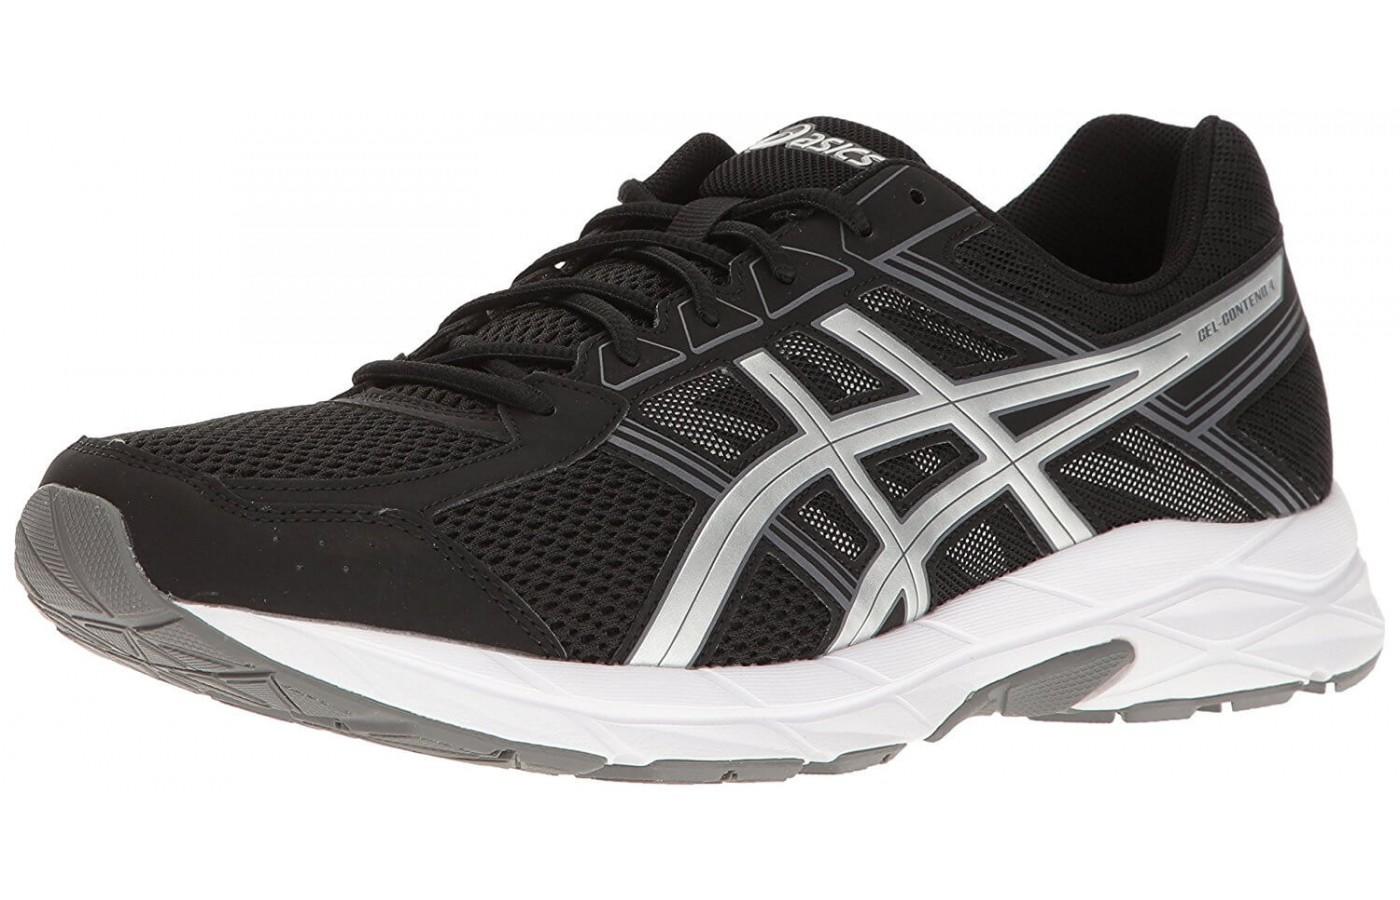 Asics Gel Contend 4 is an affordable, high quality shoe. 